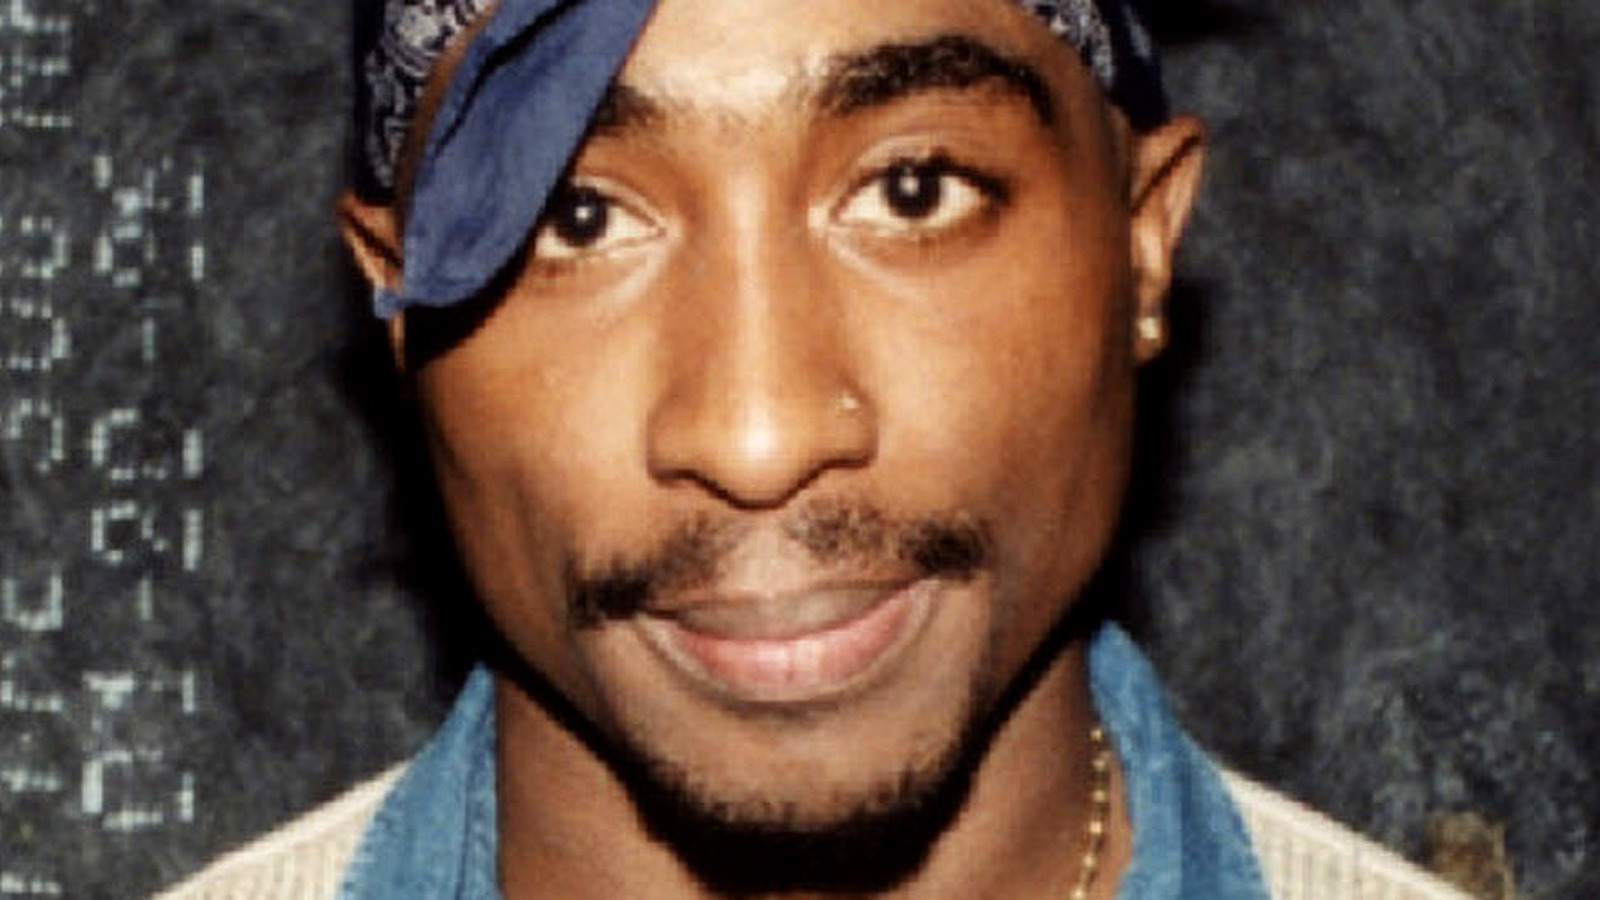 Tupac Shakur Had A Place In His Heart For An Unlikely Style Of Music – Grunge